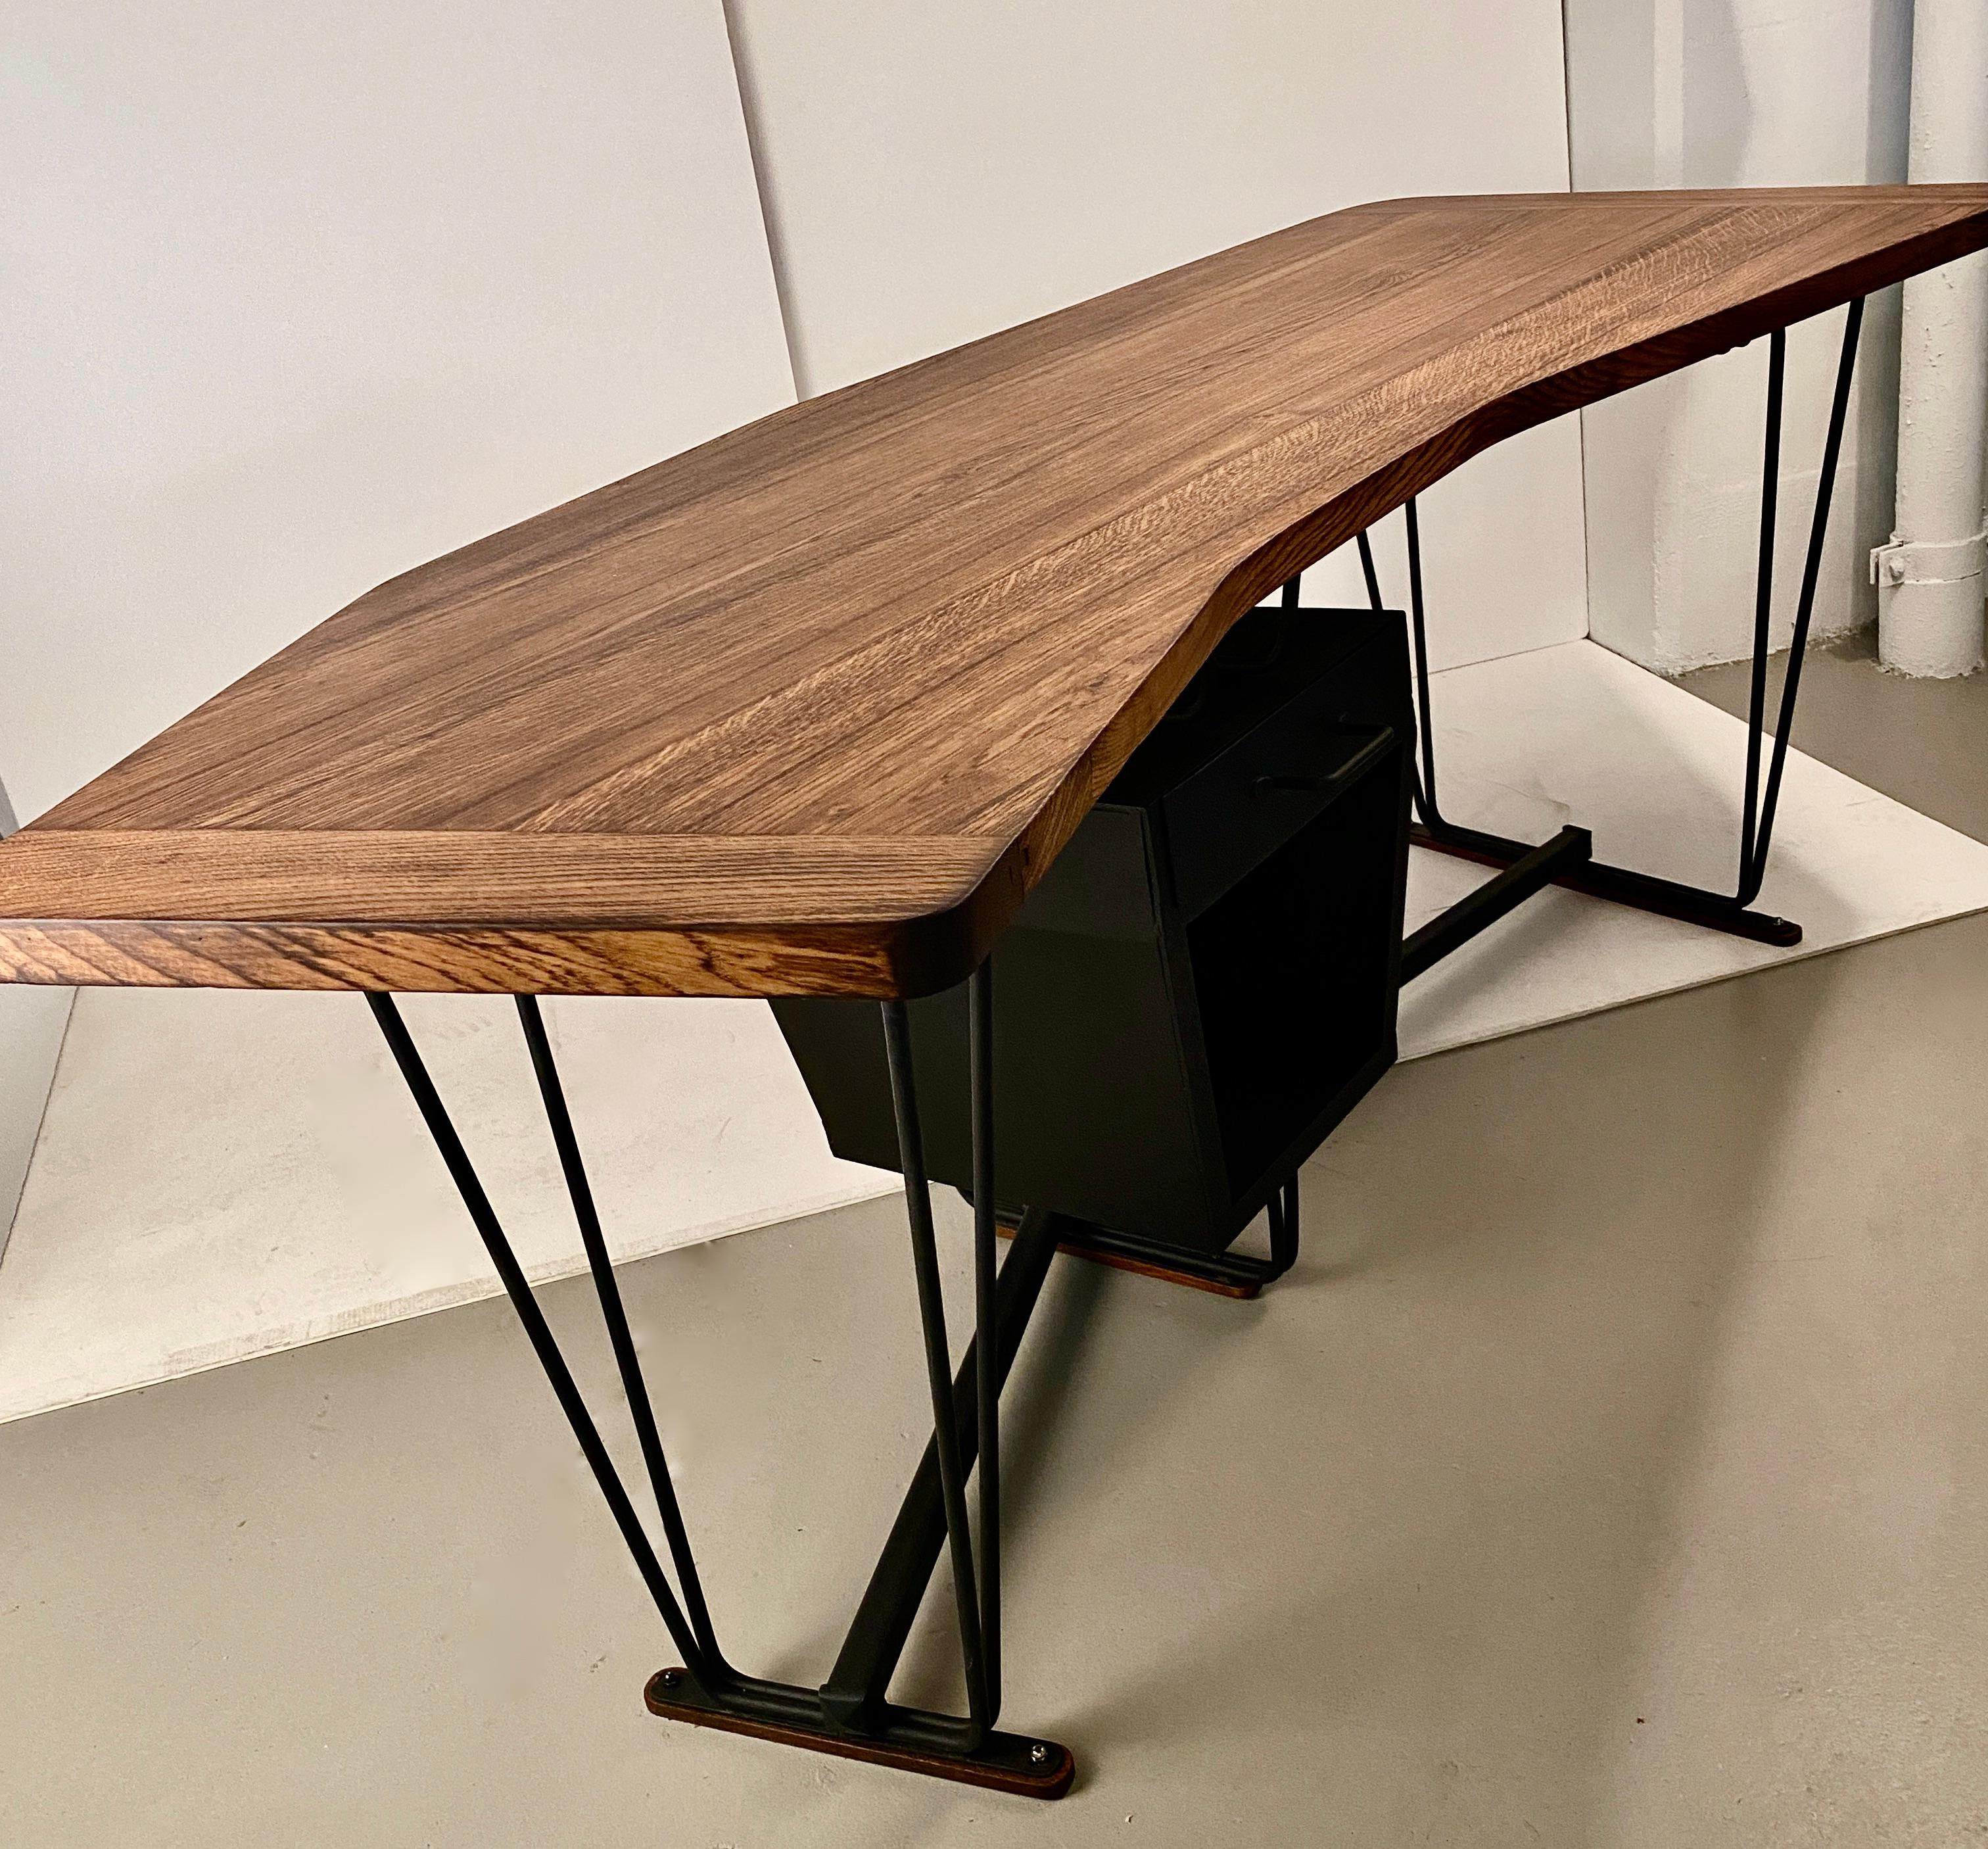 French Modern Oak and Iron Boomerang Form Desk, France, circa 1930s For Sale